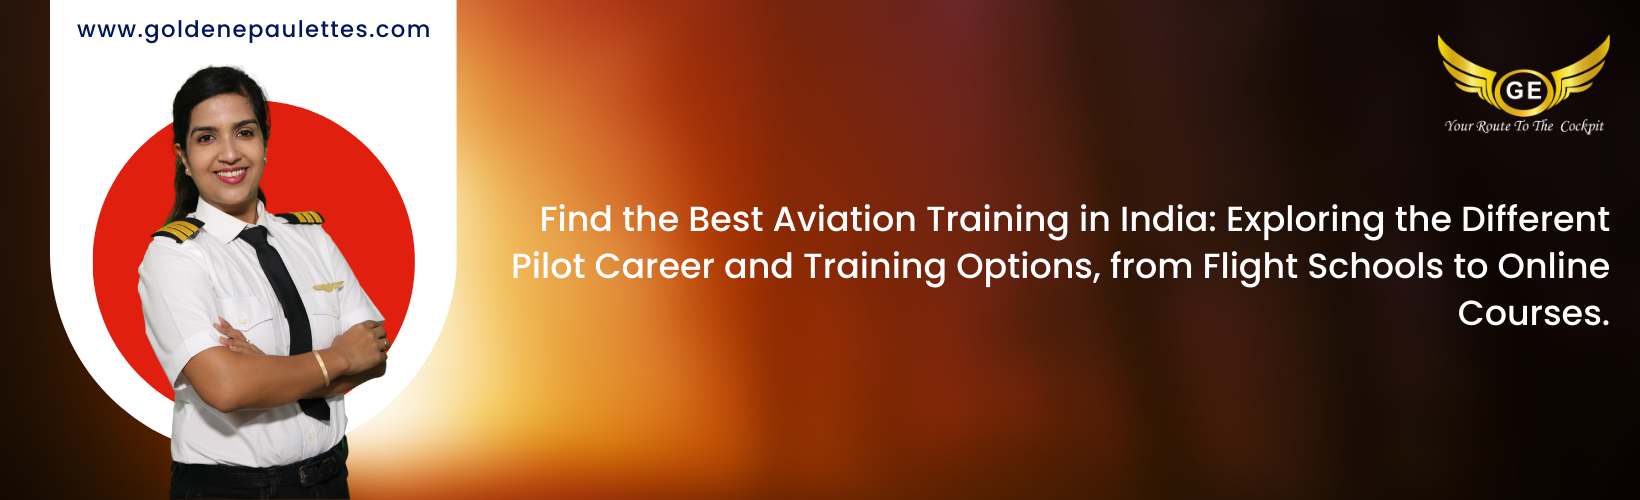 Finding the Right Aviation Training in India